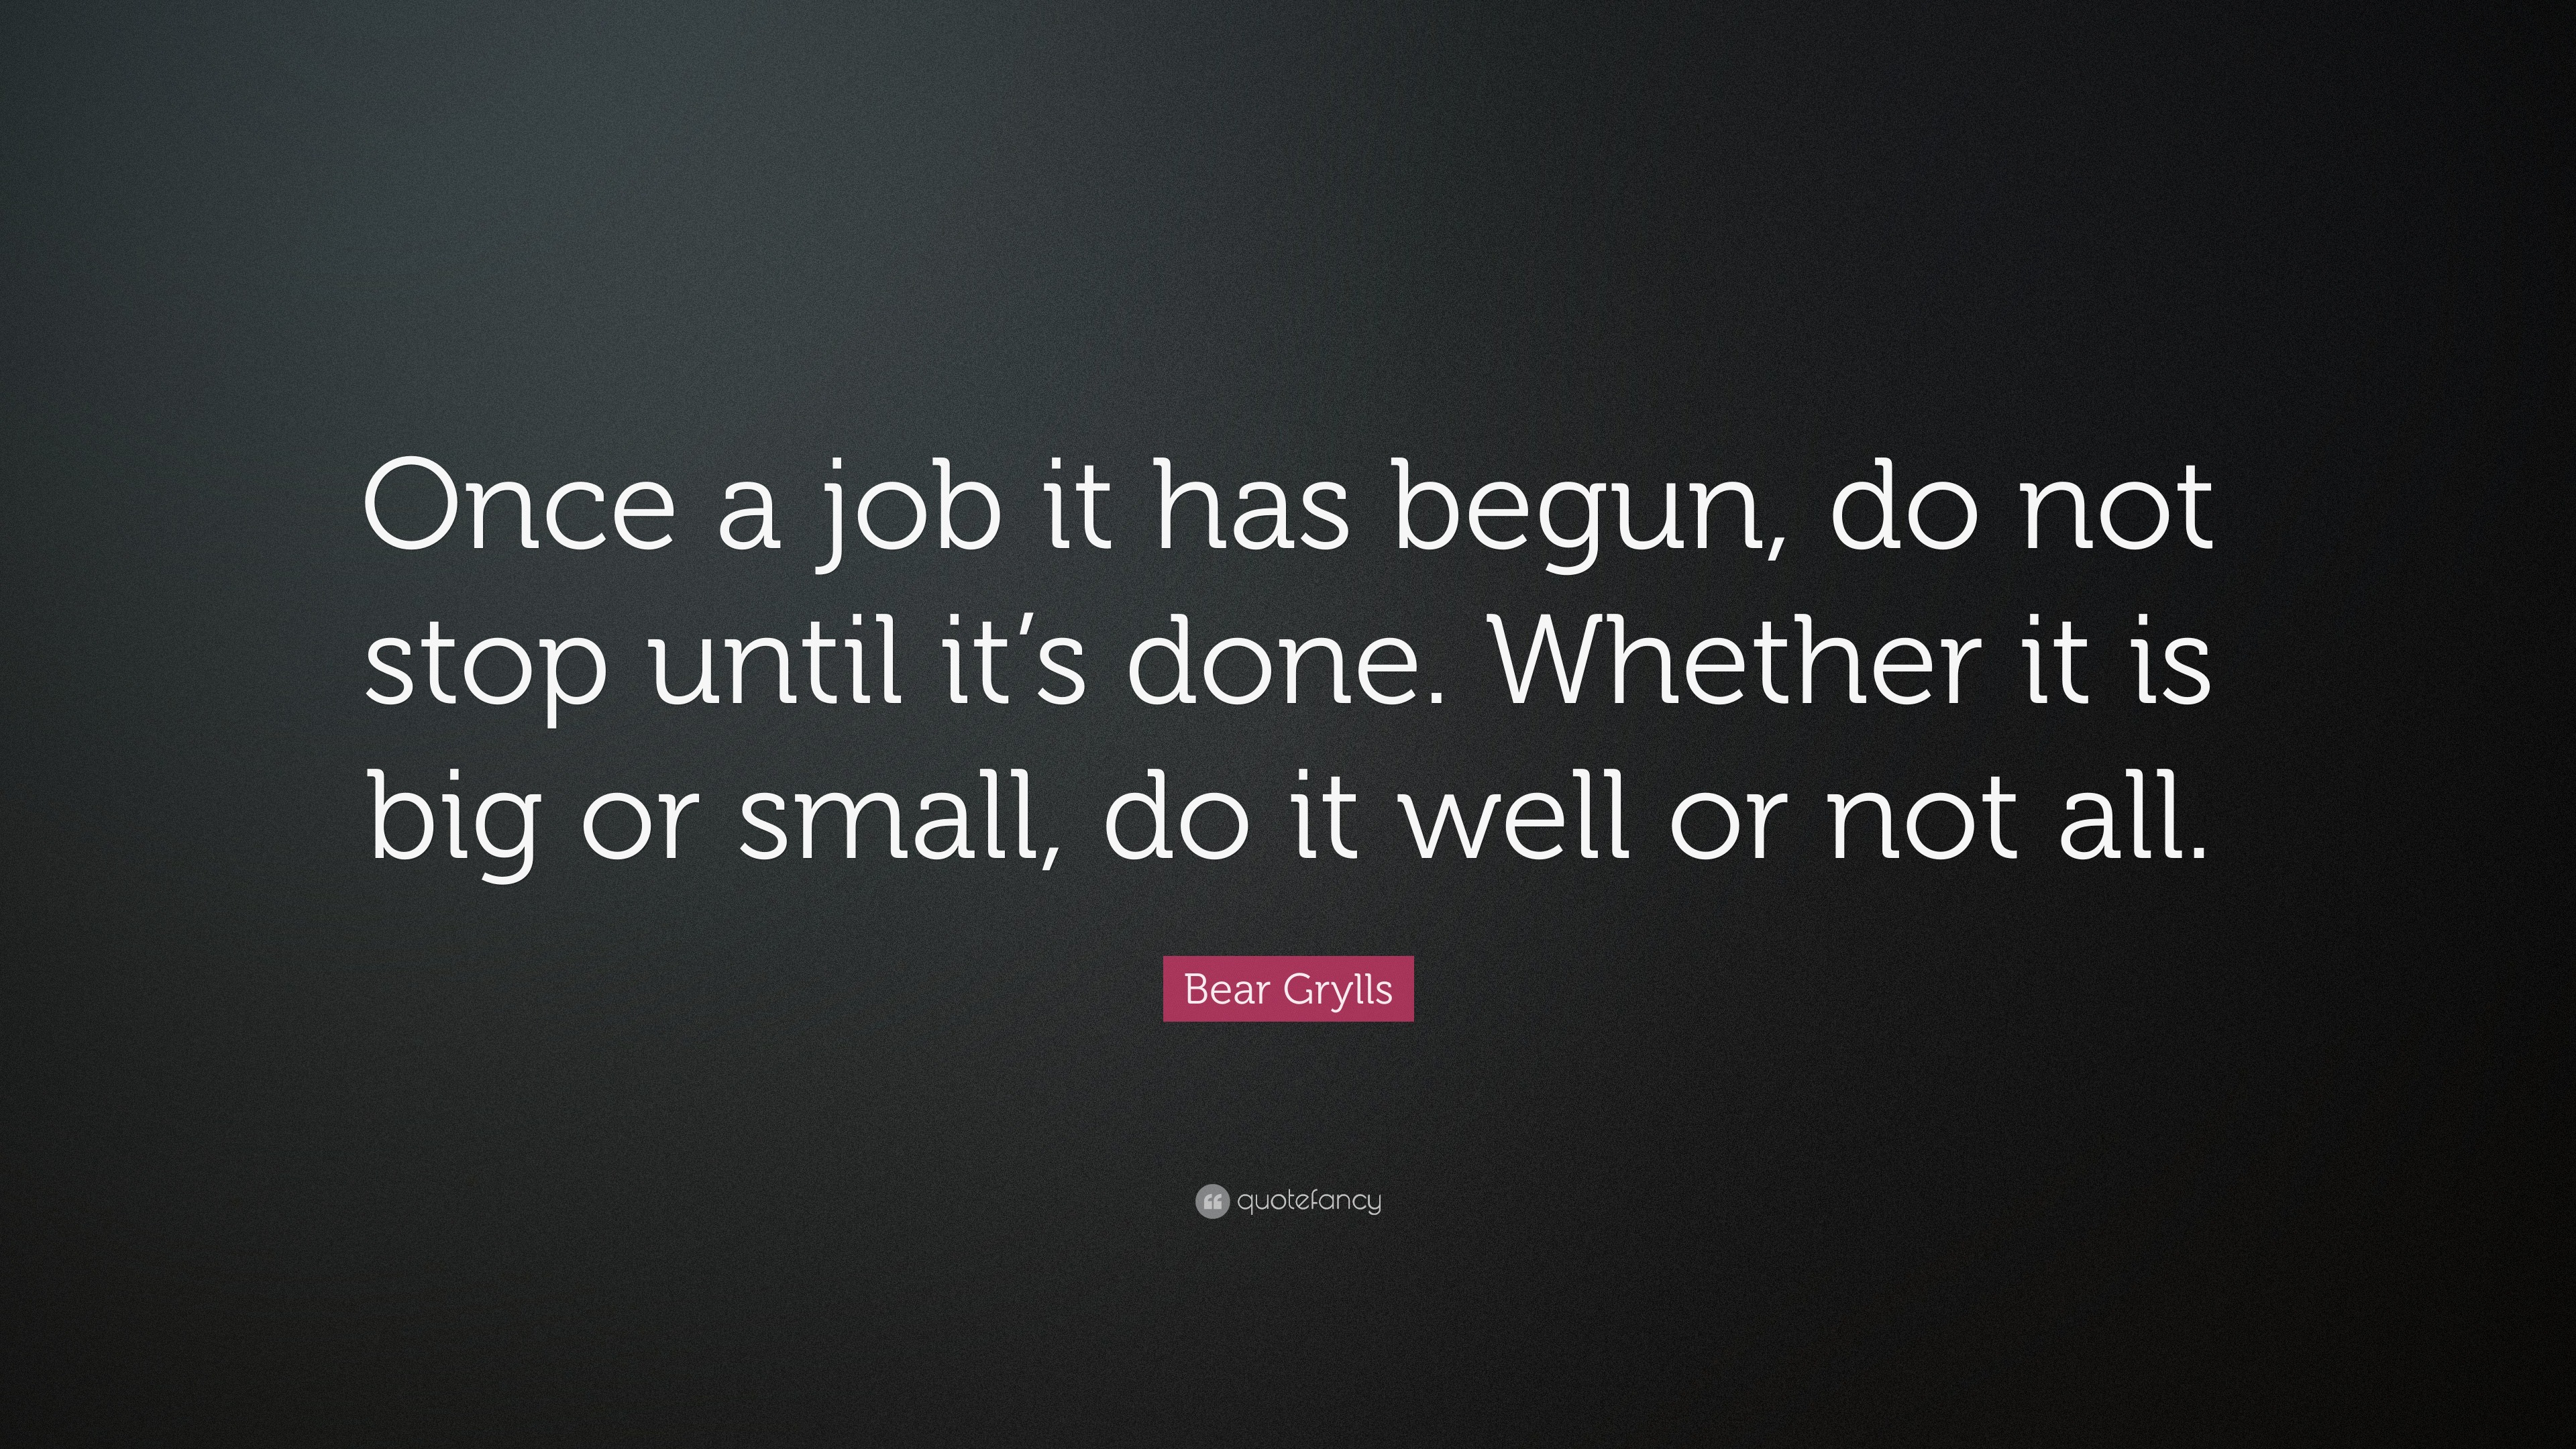 Bear Grylls Quote: “Once a job it has begun, do not stop until it’s ...